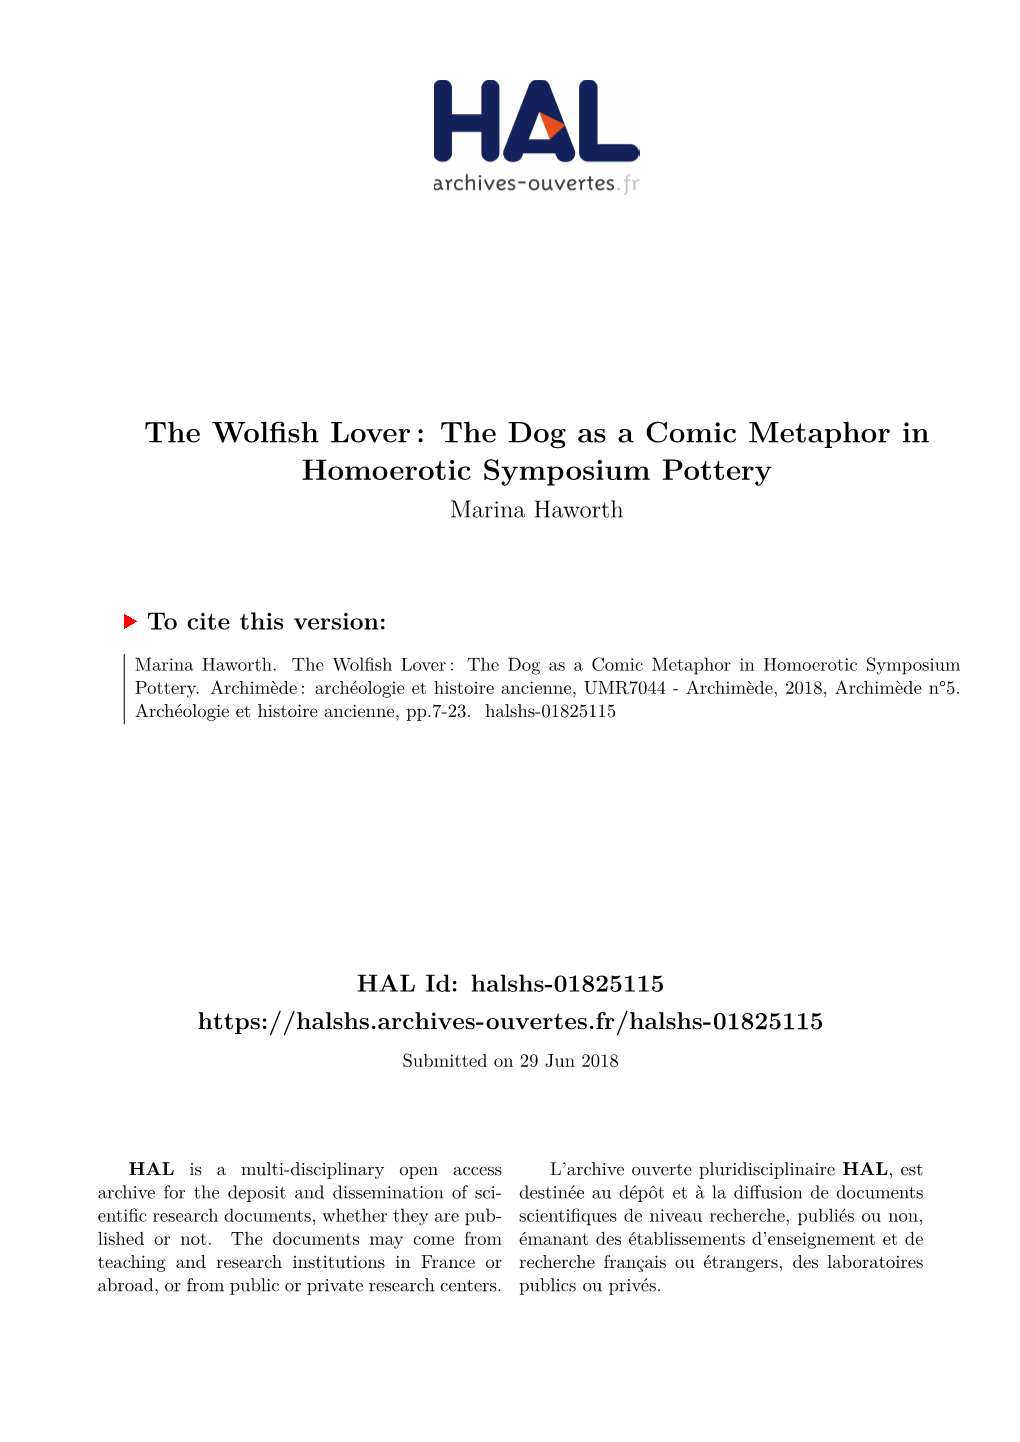 The Wolfish Lover: the Dog As a Comic Metaphor in Homoerotic Symposium Pottery